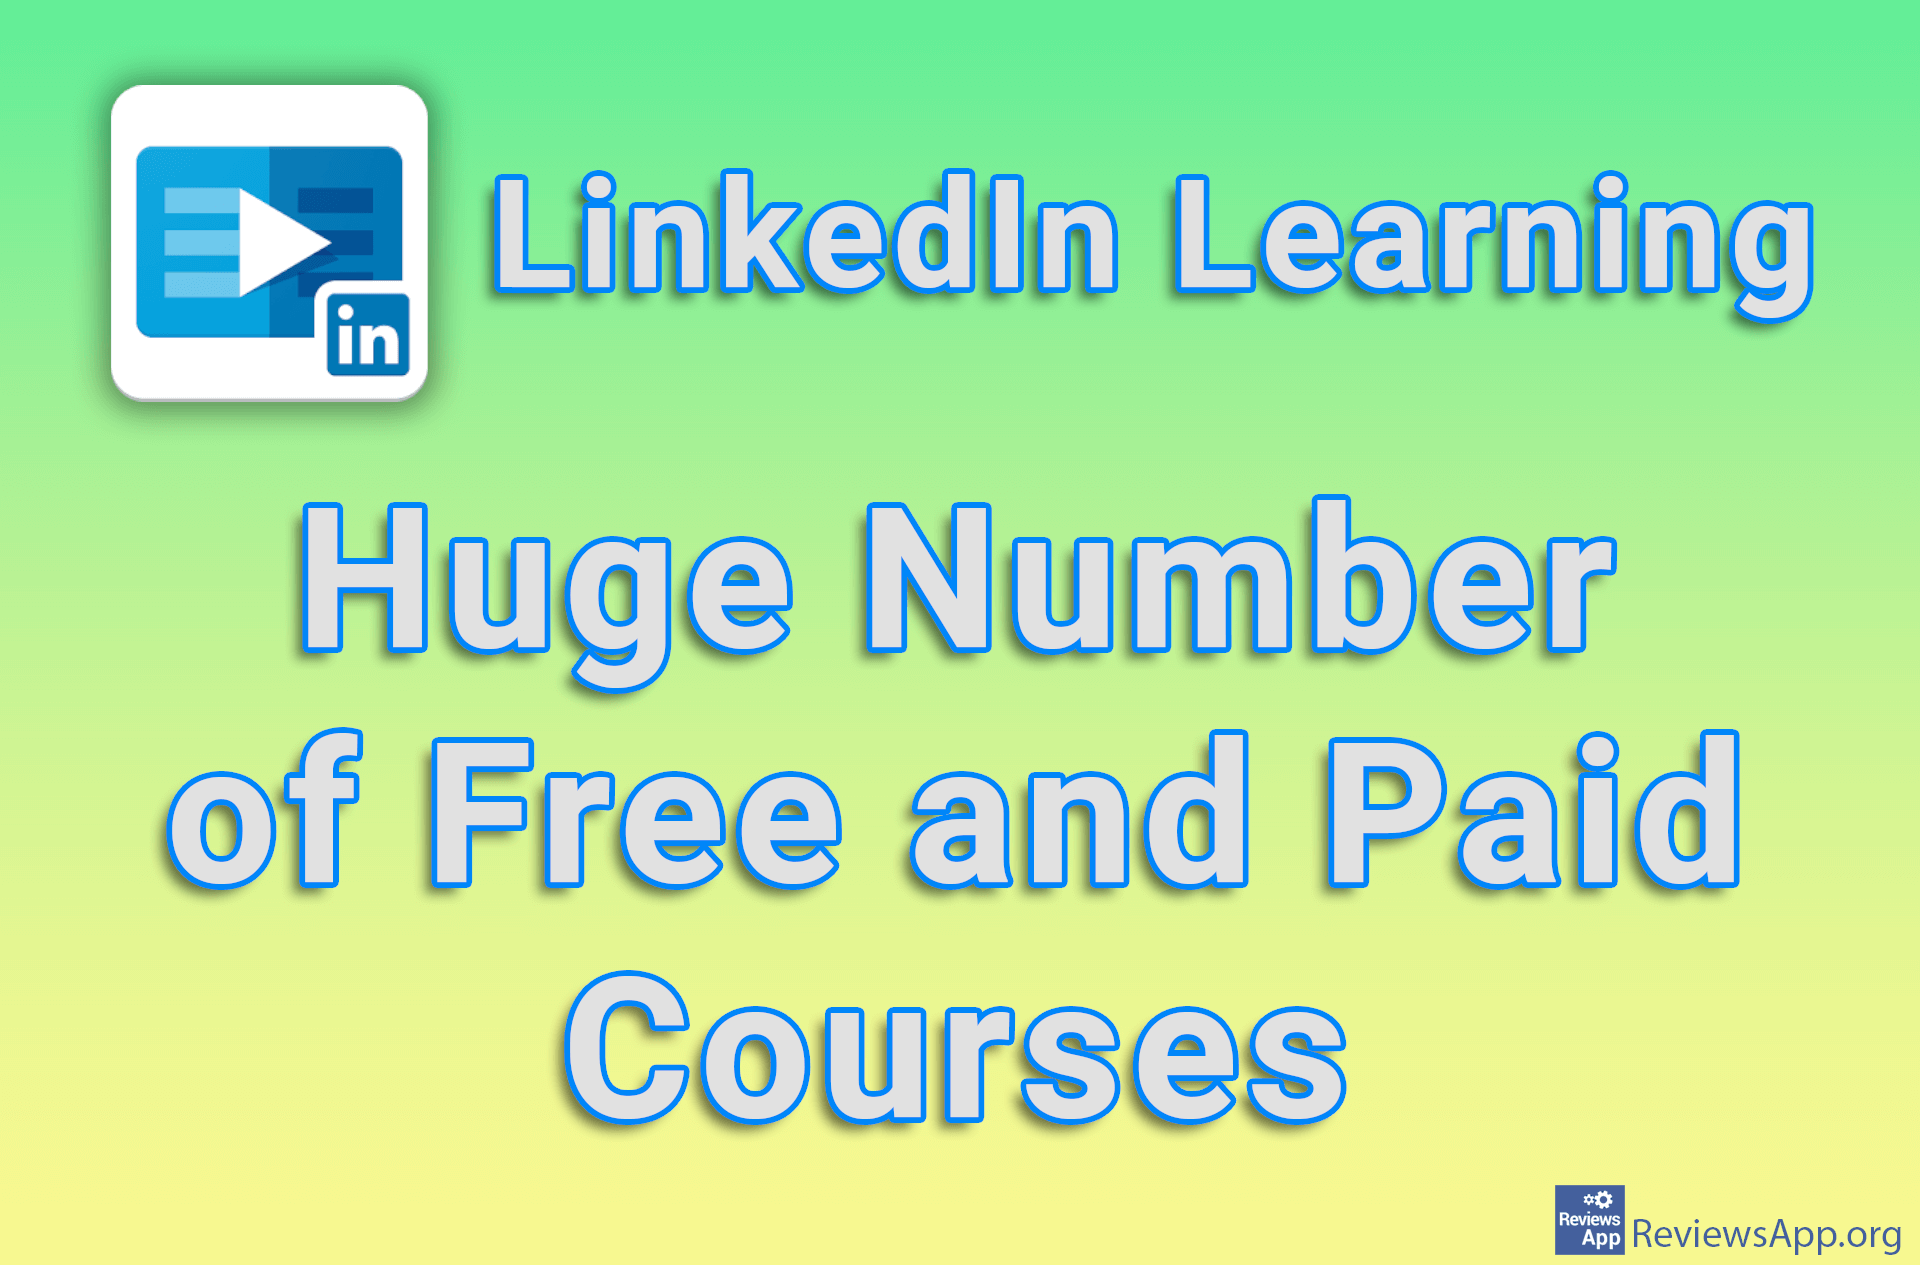 LinkedIn Learning – Huge Number of Free and Paid Courses